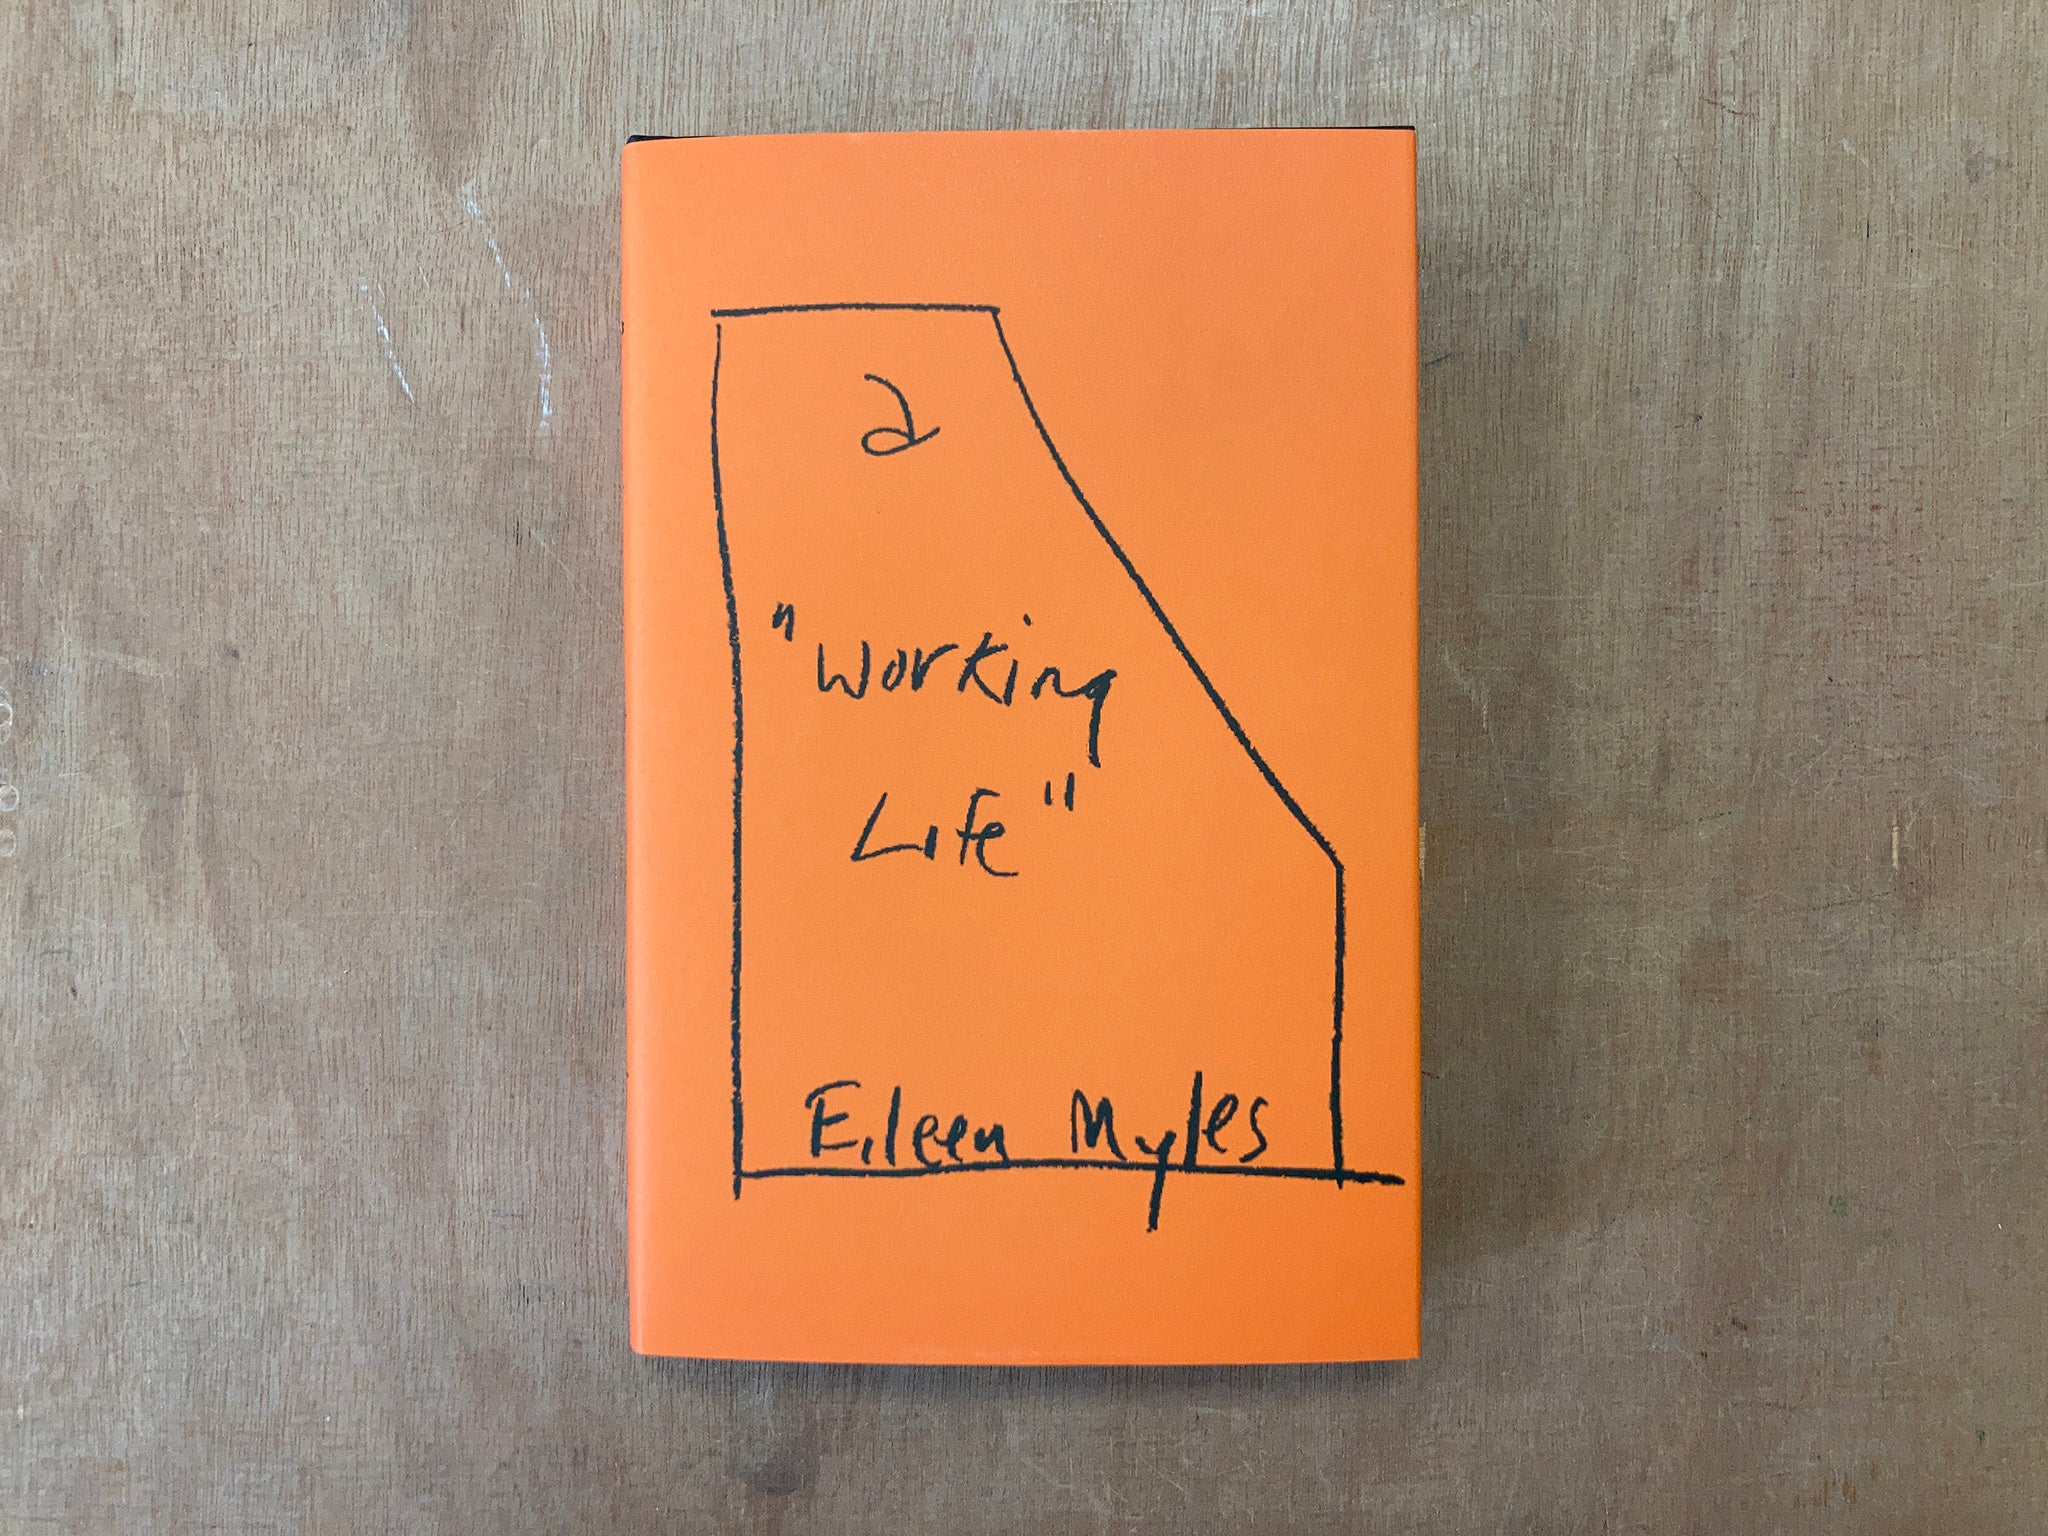 A “WORKING LIFE” by Eileen Myles